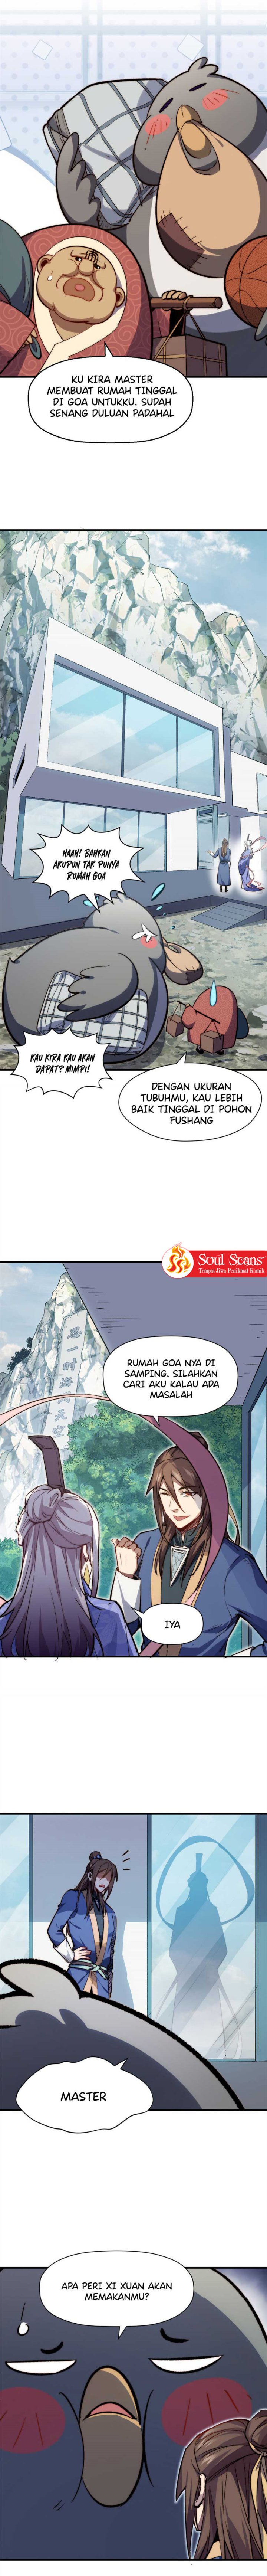 Dilarang COPAS - situs resmi www.mangacanblog.com - Komik top tier providence secretly cultivate for a thousand years 097 - chapter 97 98 Indonesia top tier providence secretly cultivate for a thousand years 097 - chapter 97 Terbaru 9|Baca Manga Komik Indonesia|Mangacan